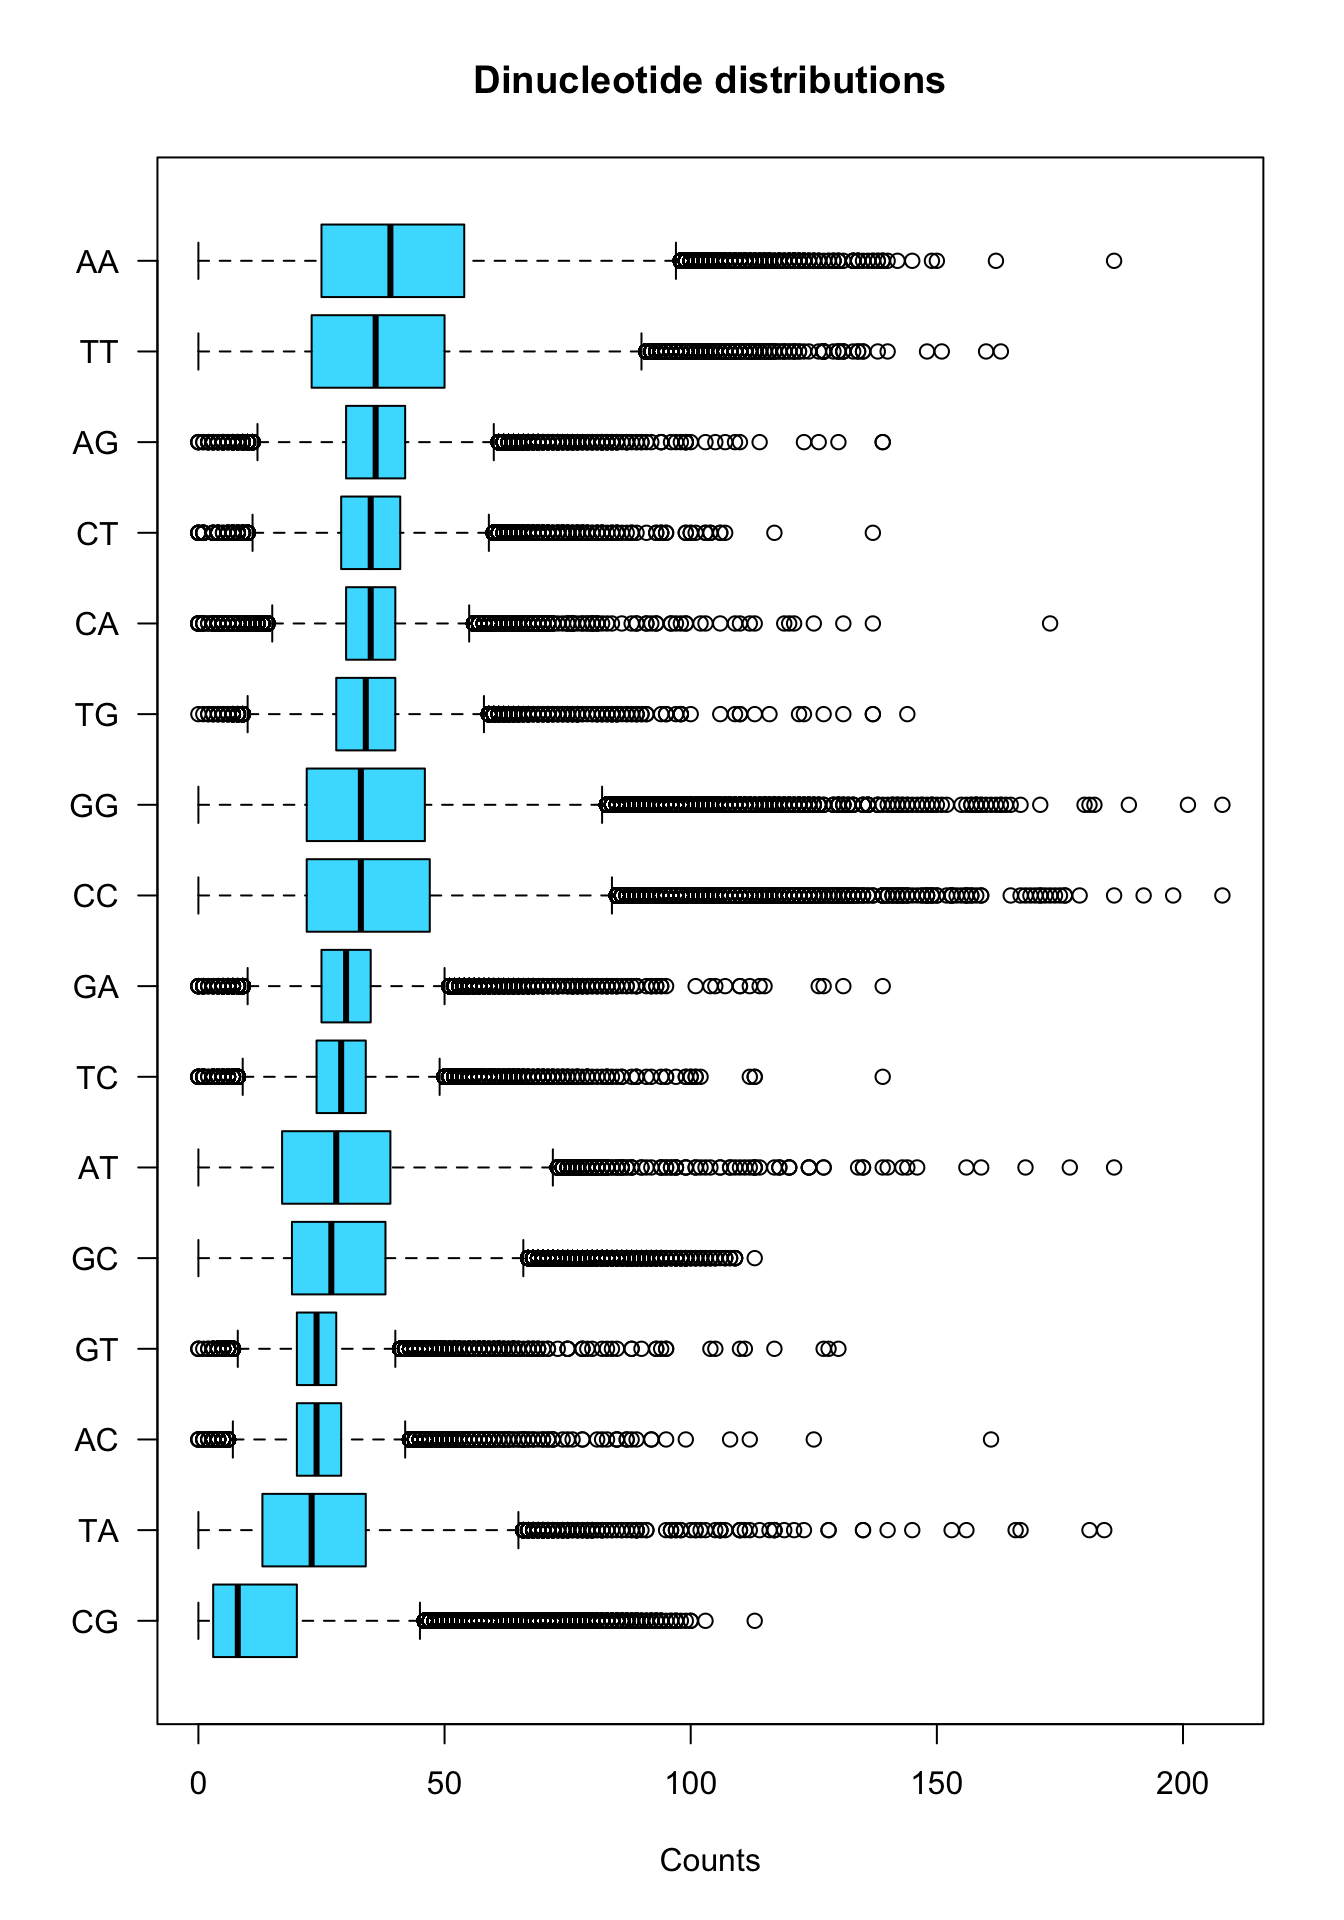 Boxplot of dinucleotide counts in all promoters. 